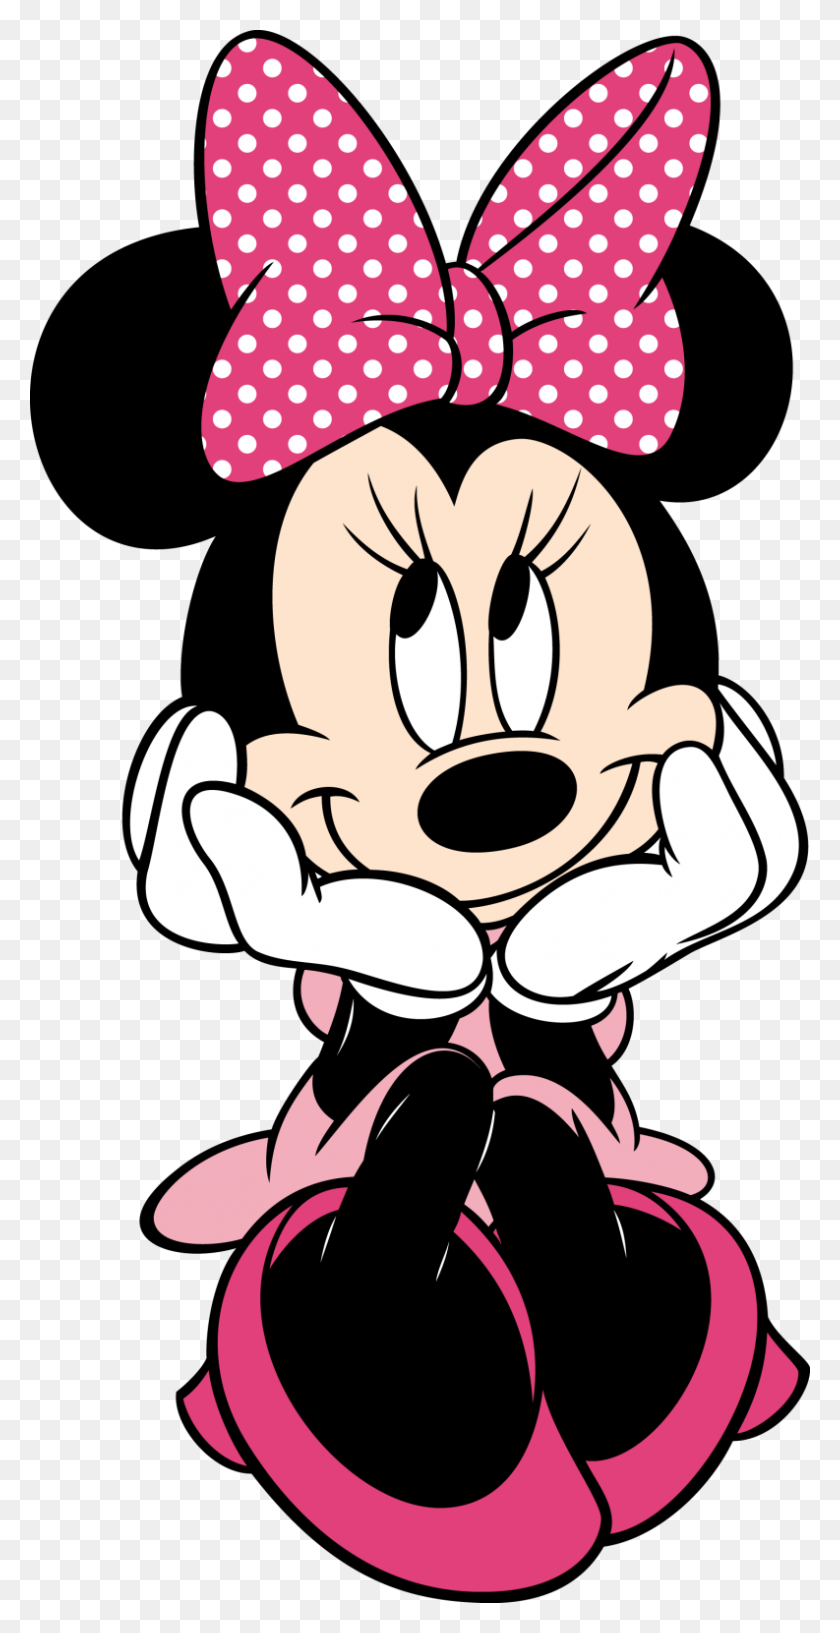 793x1600 Minnie Mouse Images Free Gallery - Steph Curry Clipart